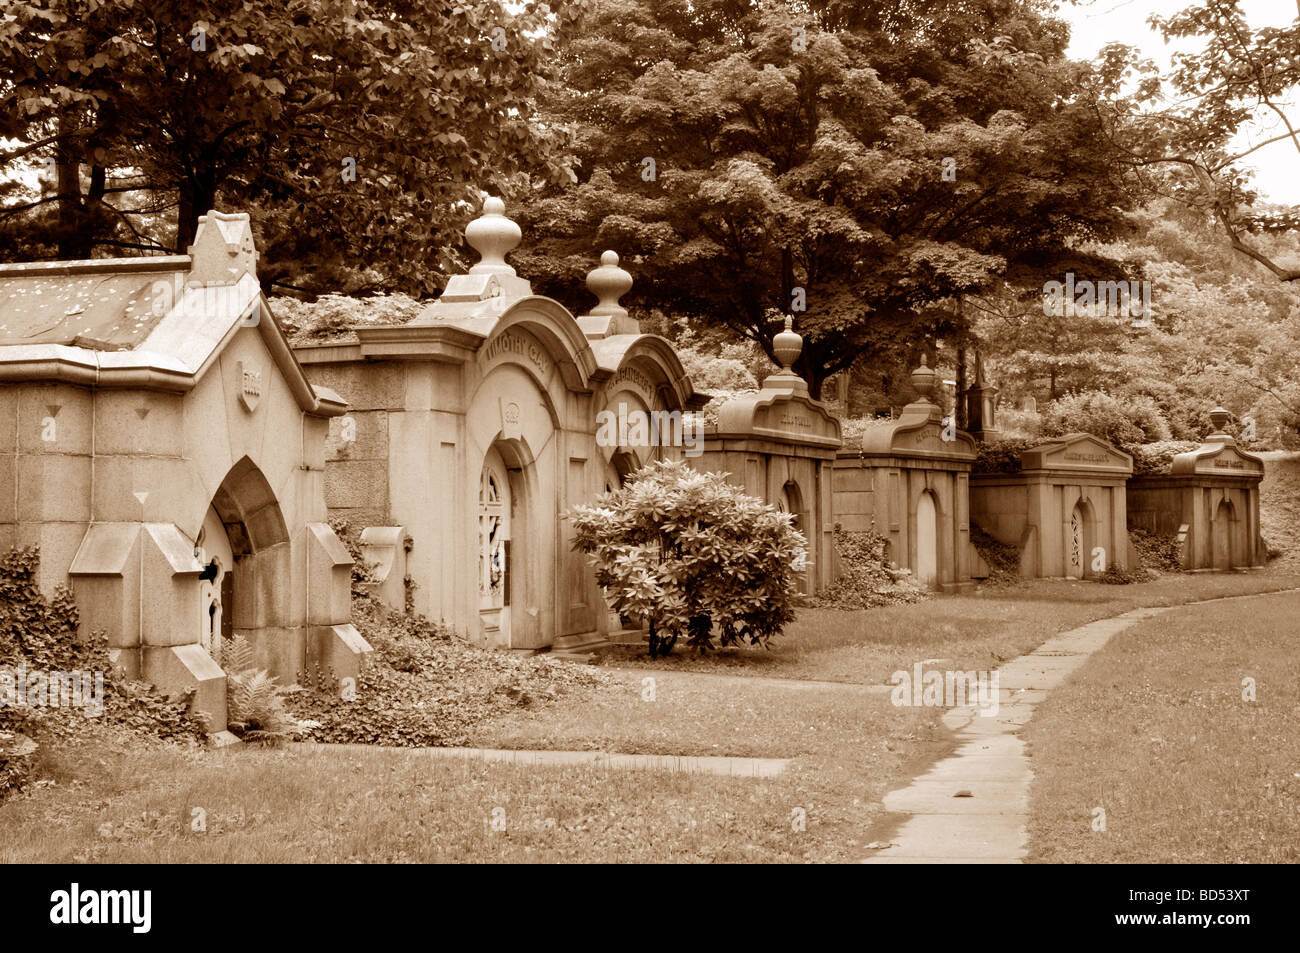 Group of old granite stone mausoleums in cemetery Stock Photo